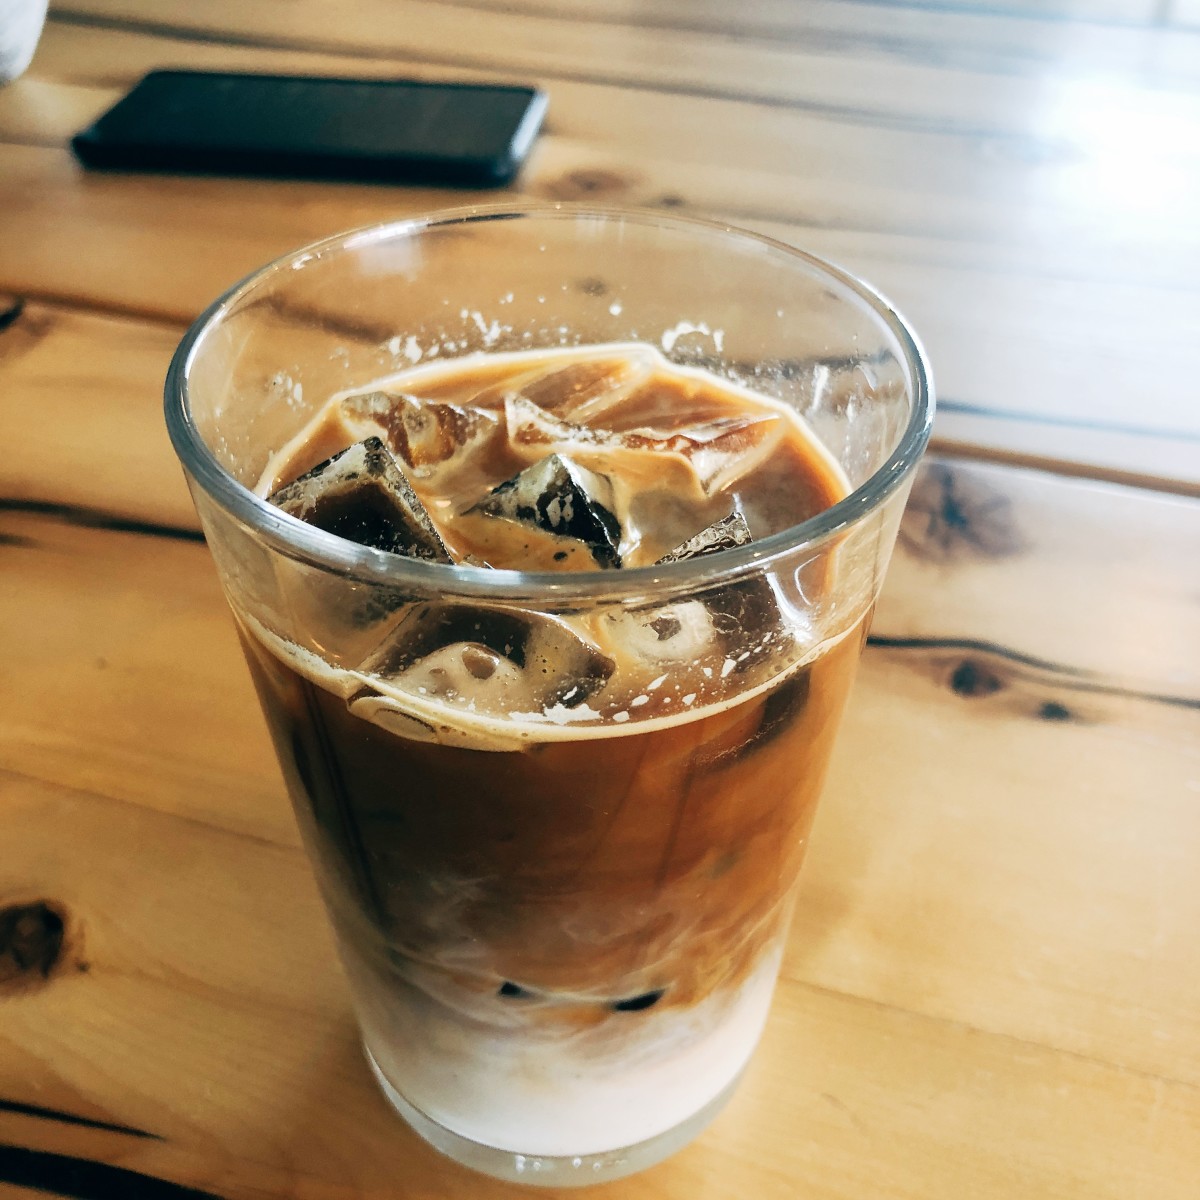 Caramel iced lattes are among my favorite coffee drinks to make at home. Check out my recipe below!